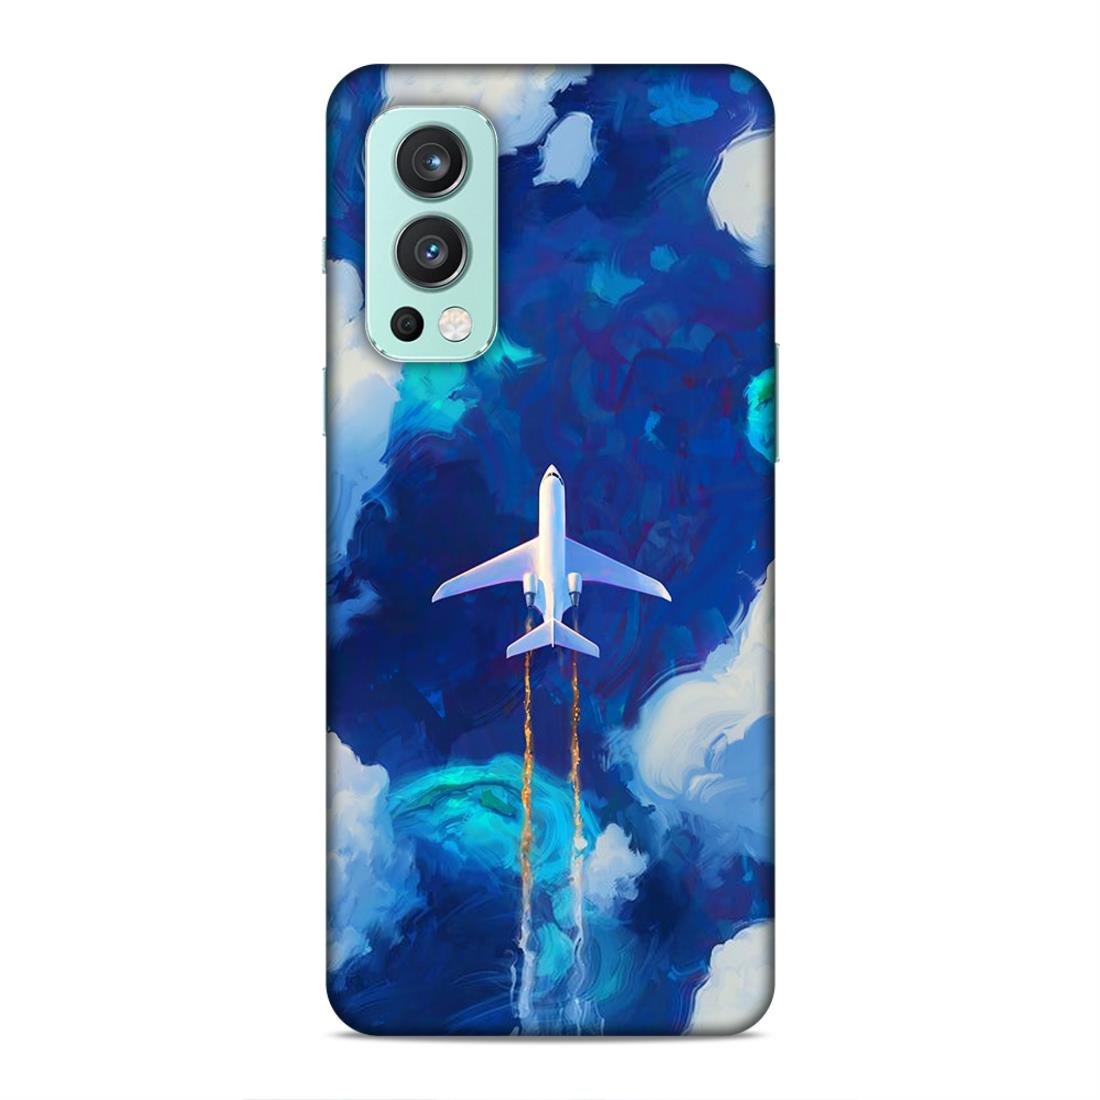 Aeroplane In The Sky Hard Back Case For OnePlus Nord 2 5G